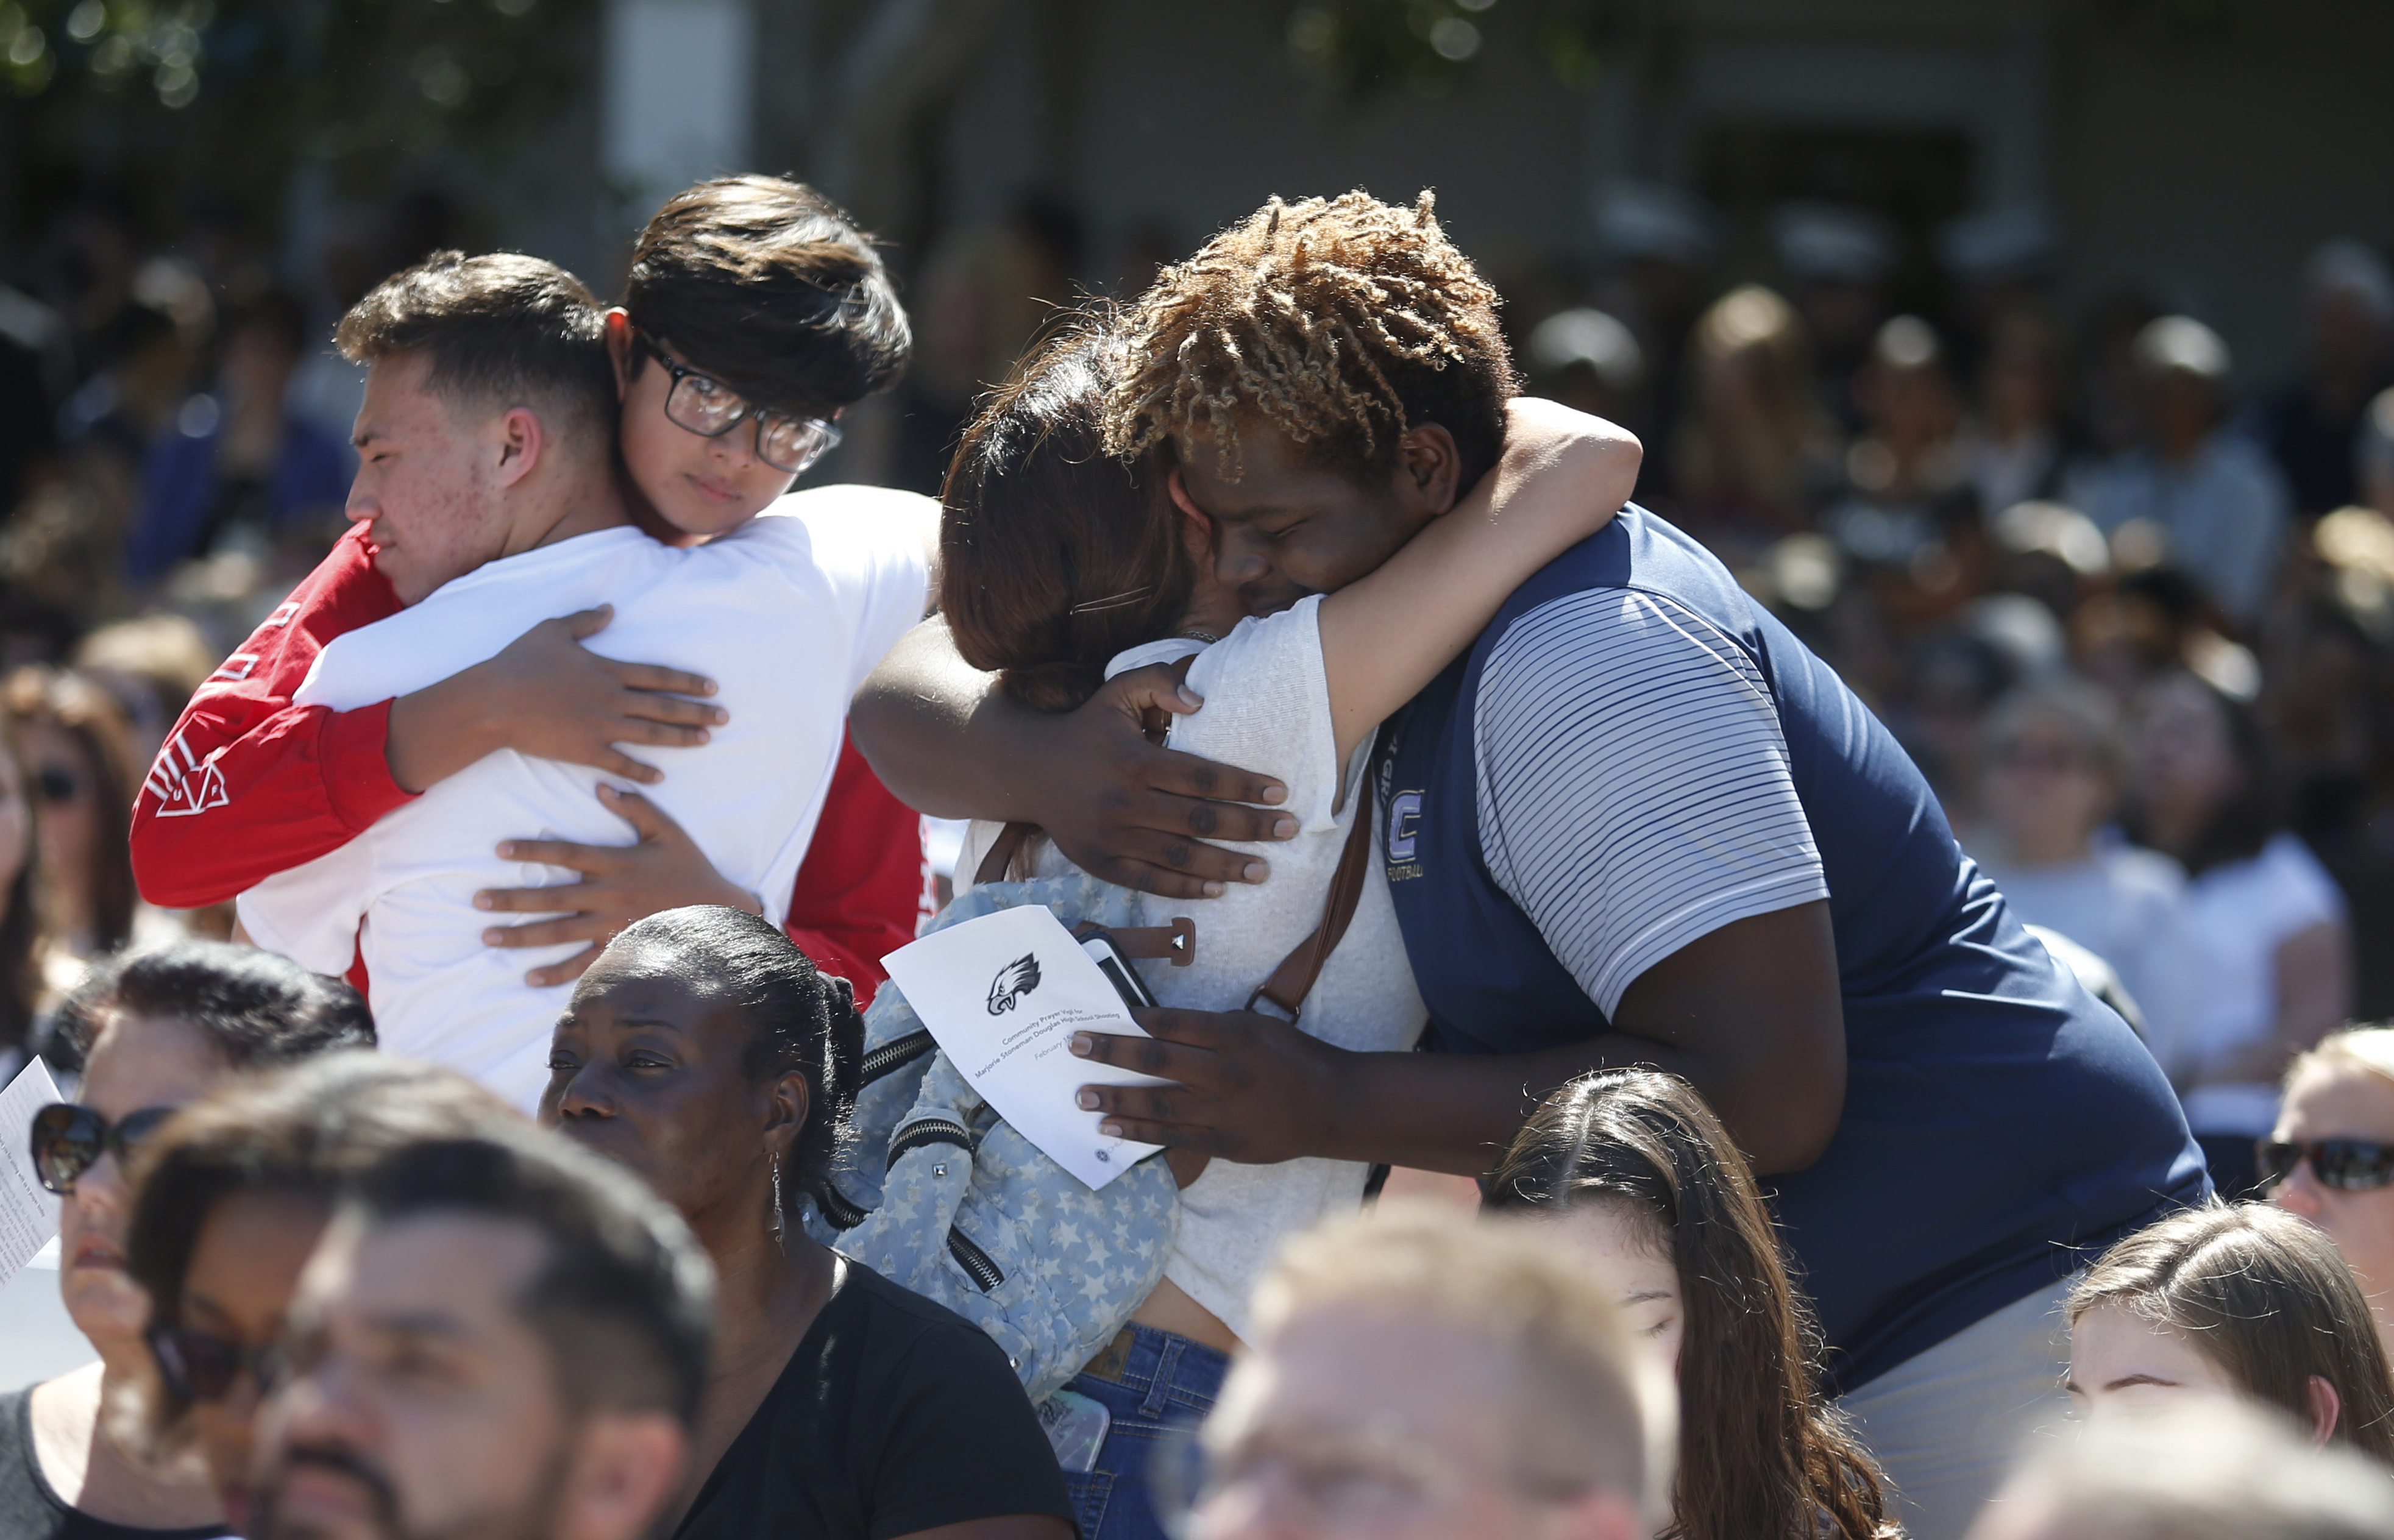 People comfort each other at a prayer vigil for the victims of the shooting (Wilfredo Lee/AP)